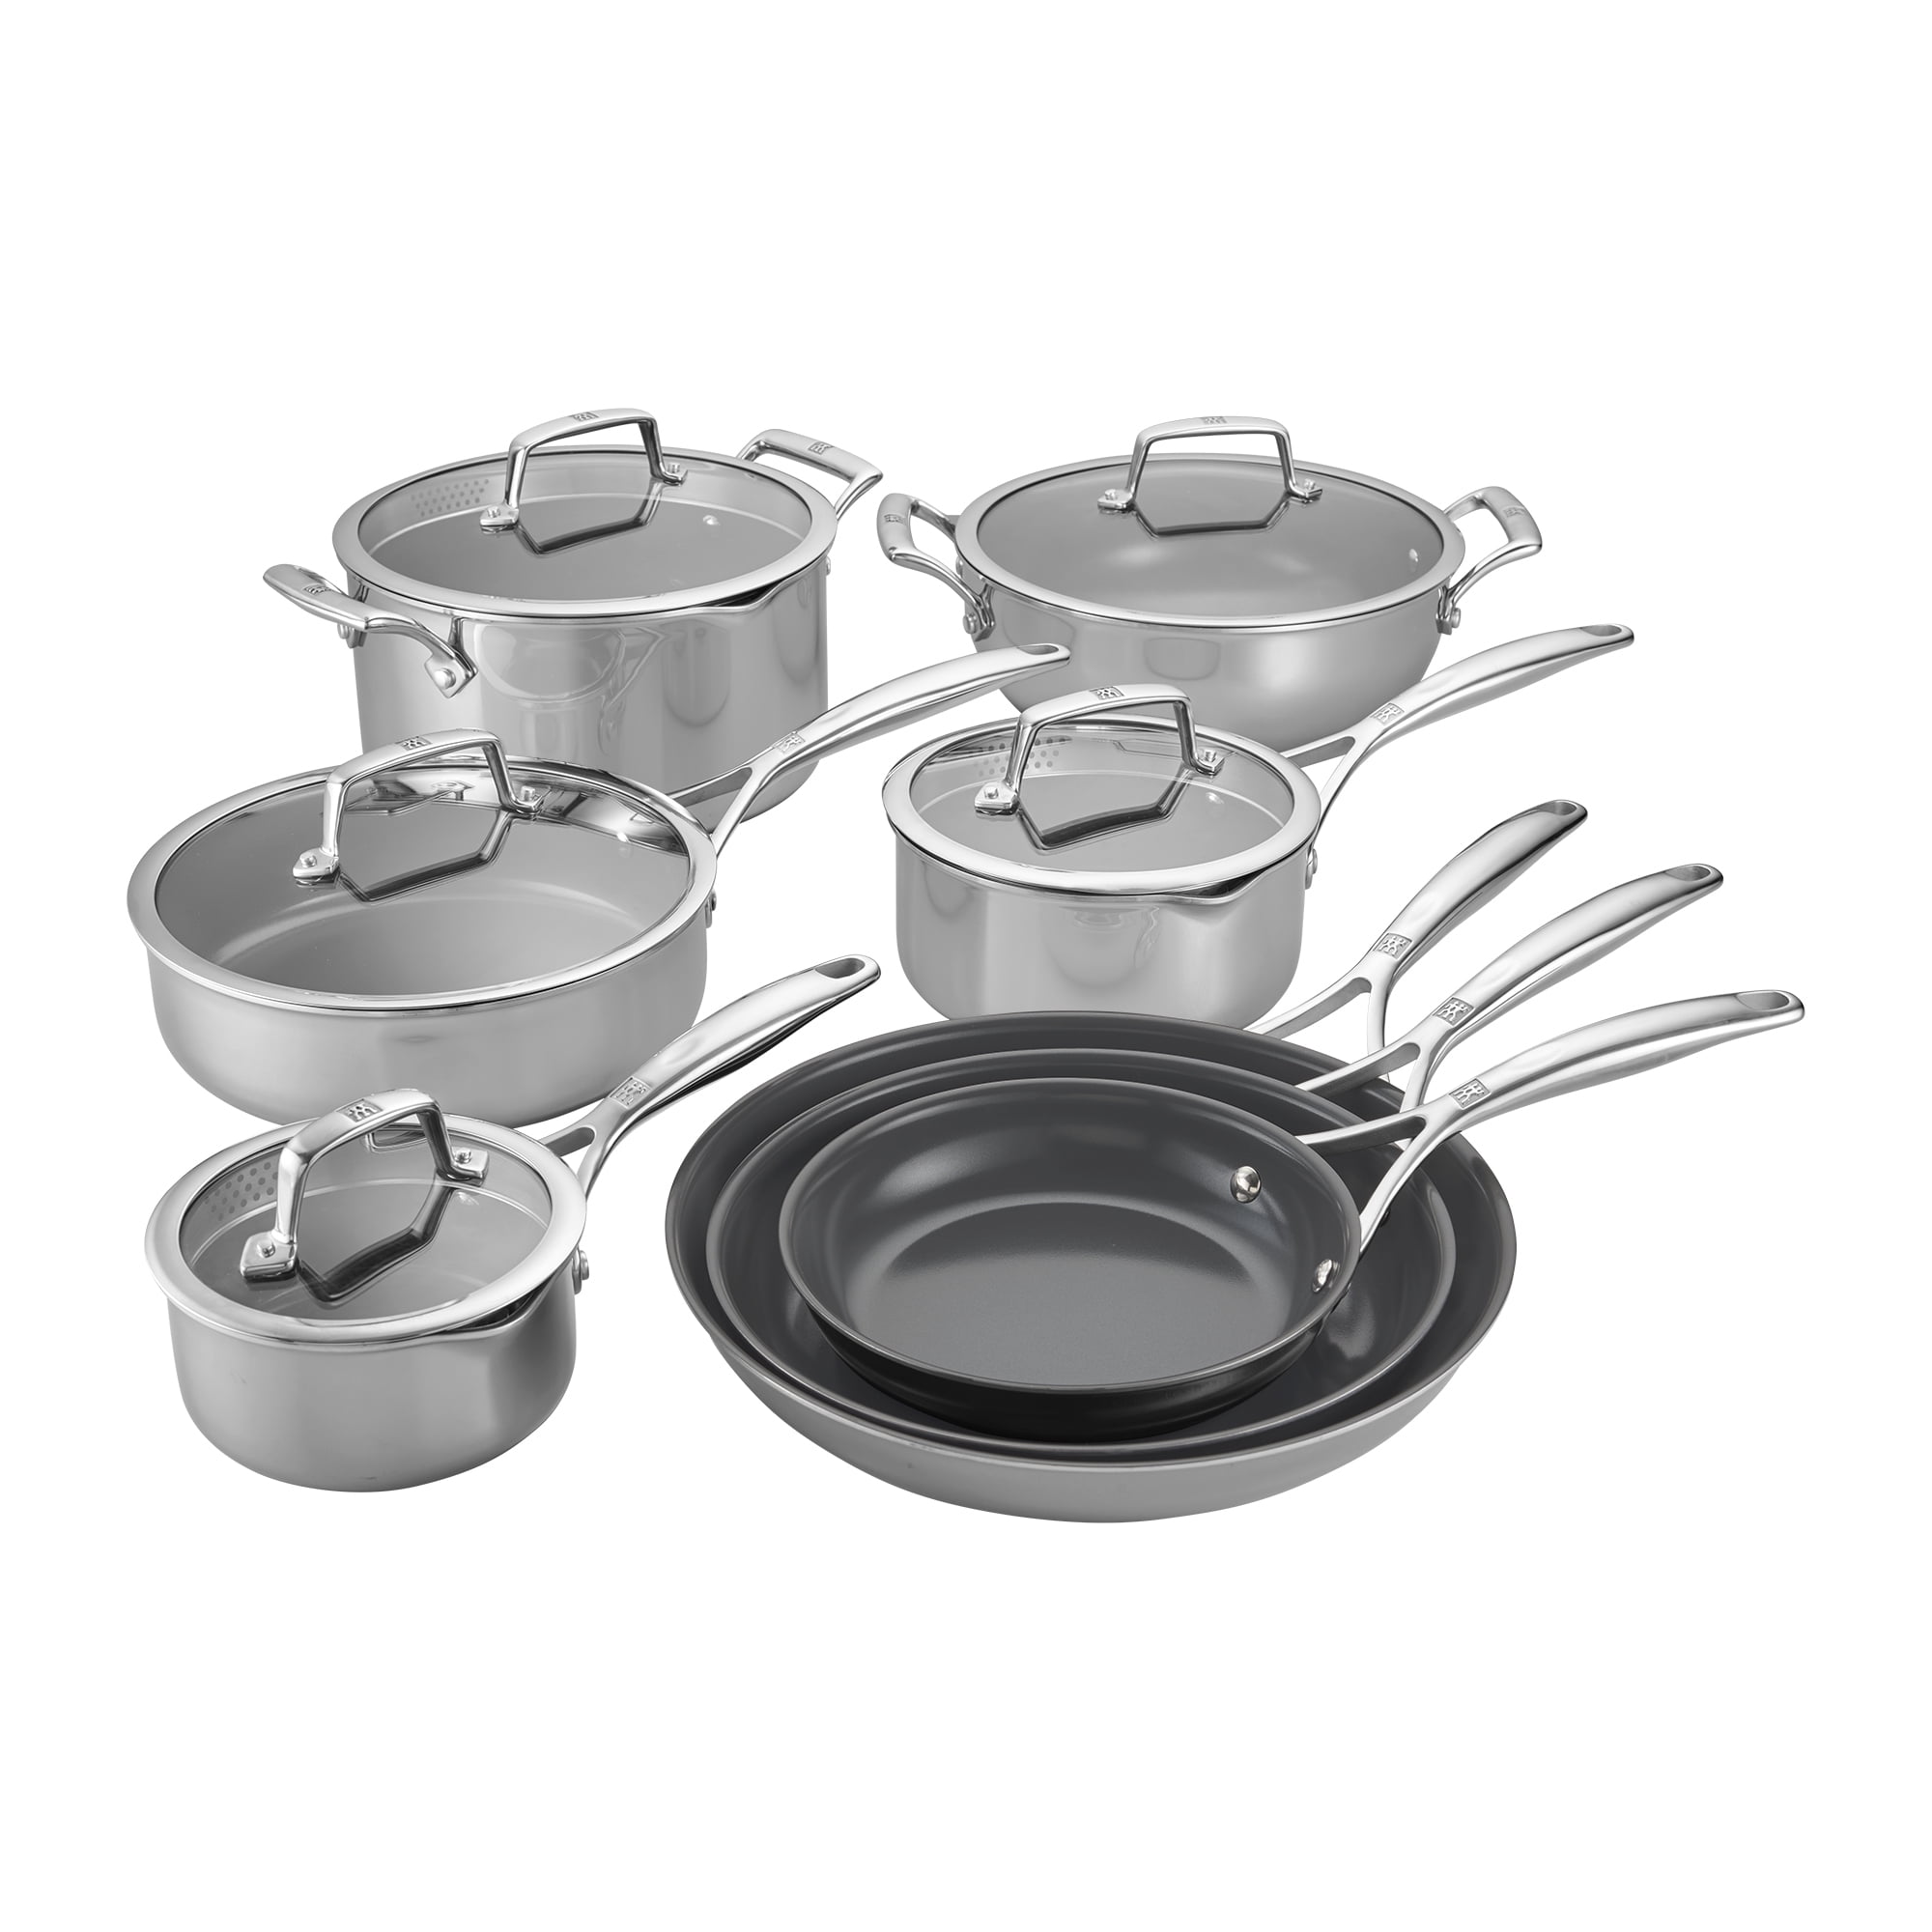 ZWILLING Energy Plus 10-pc Stainless Steel Ceramic Nonstick Cookware Set -  Sam's Club